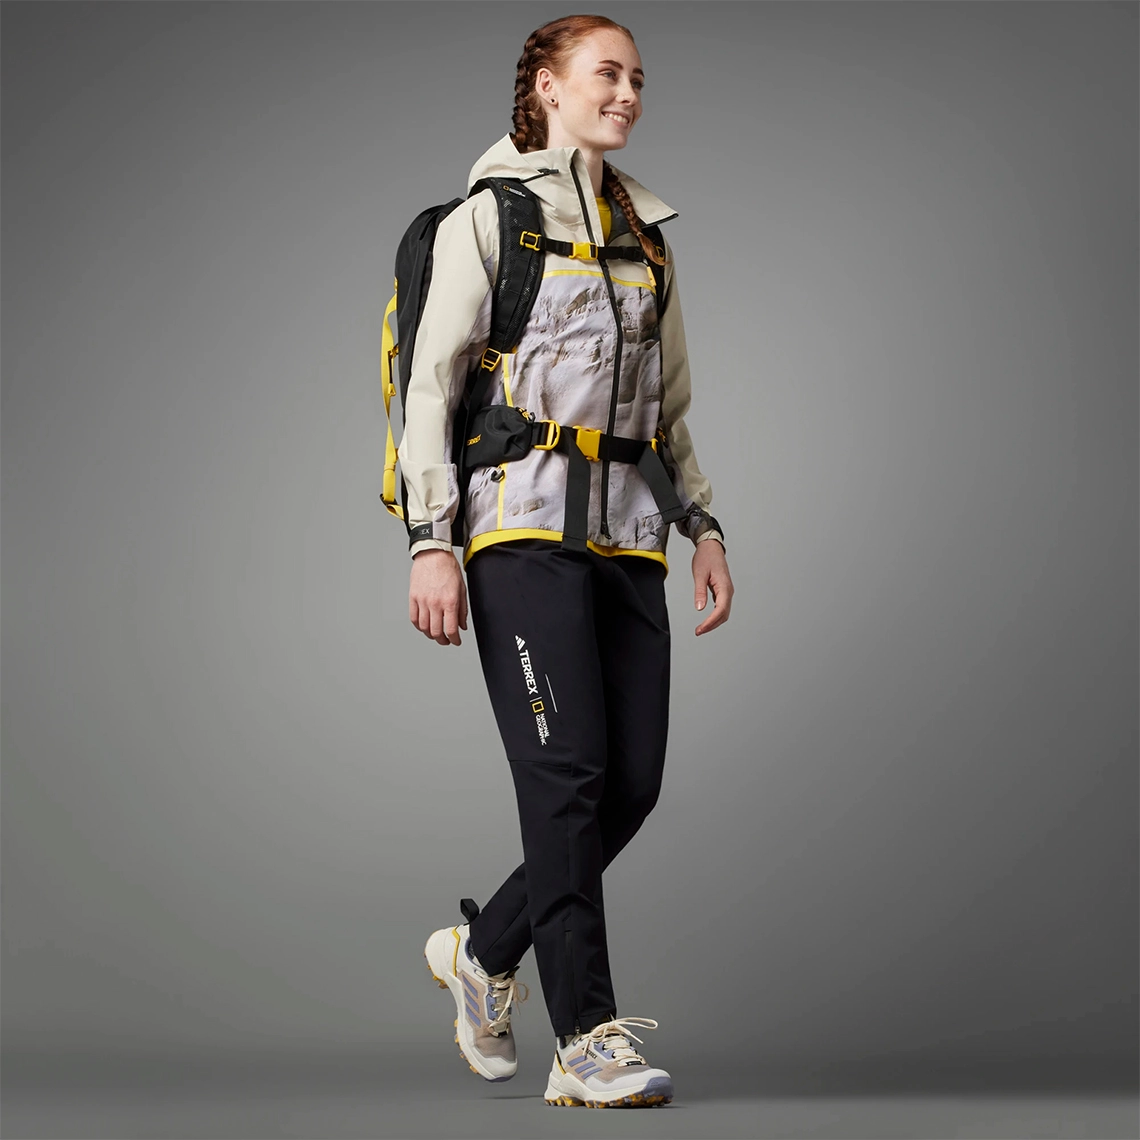 National Geographic Collaborates with adidas Terrex to Celebrate the Outdoors on April 28